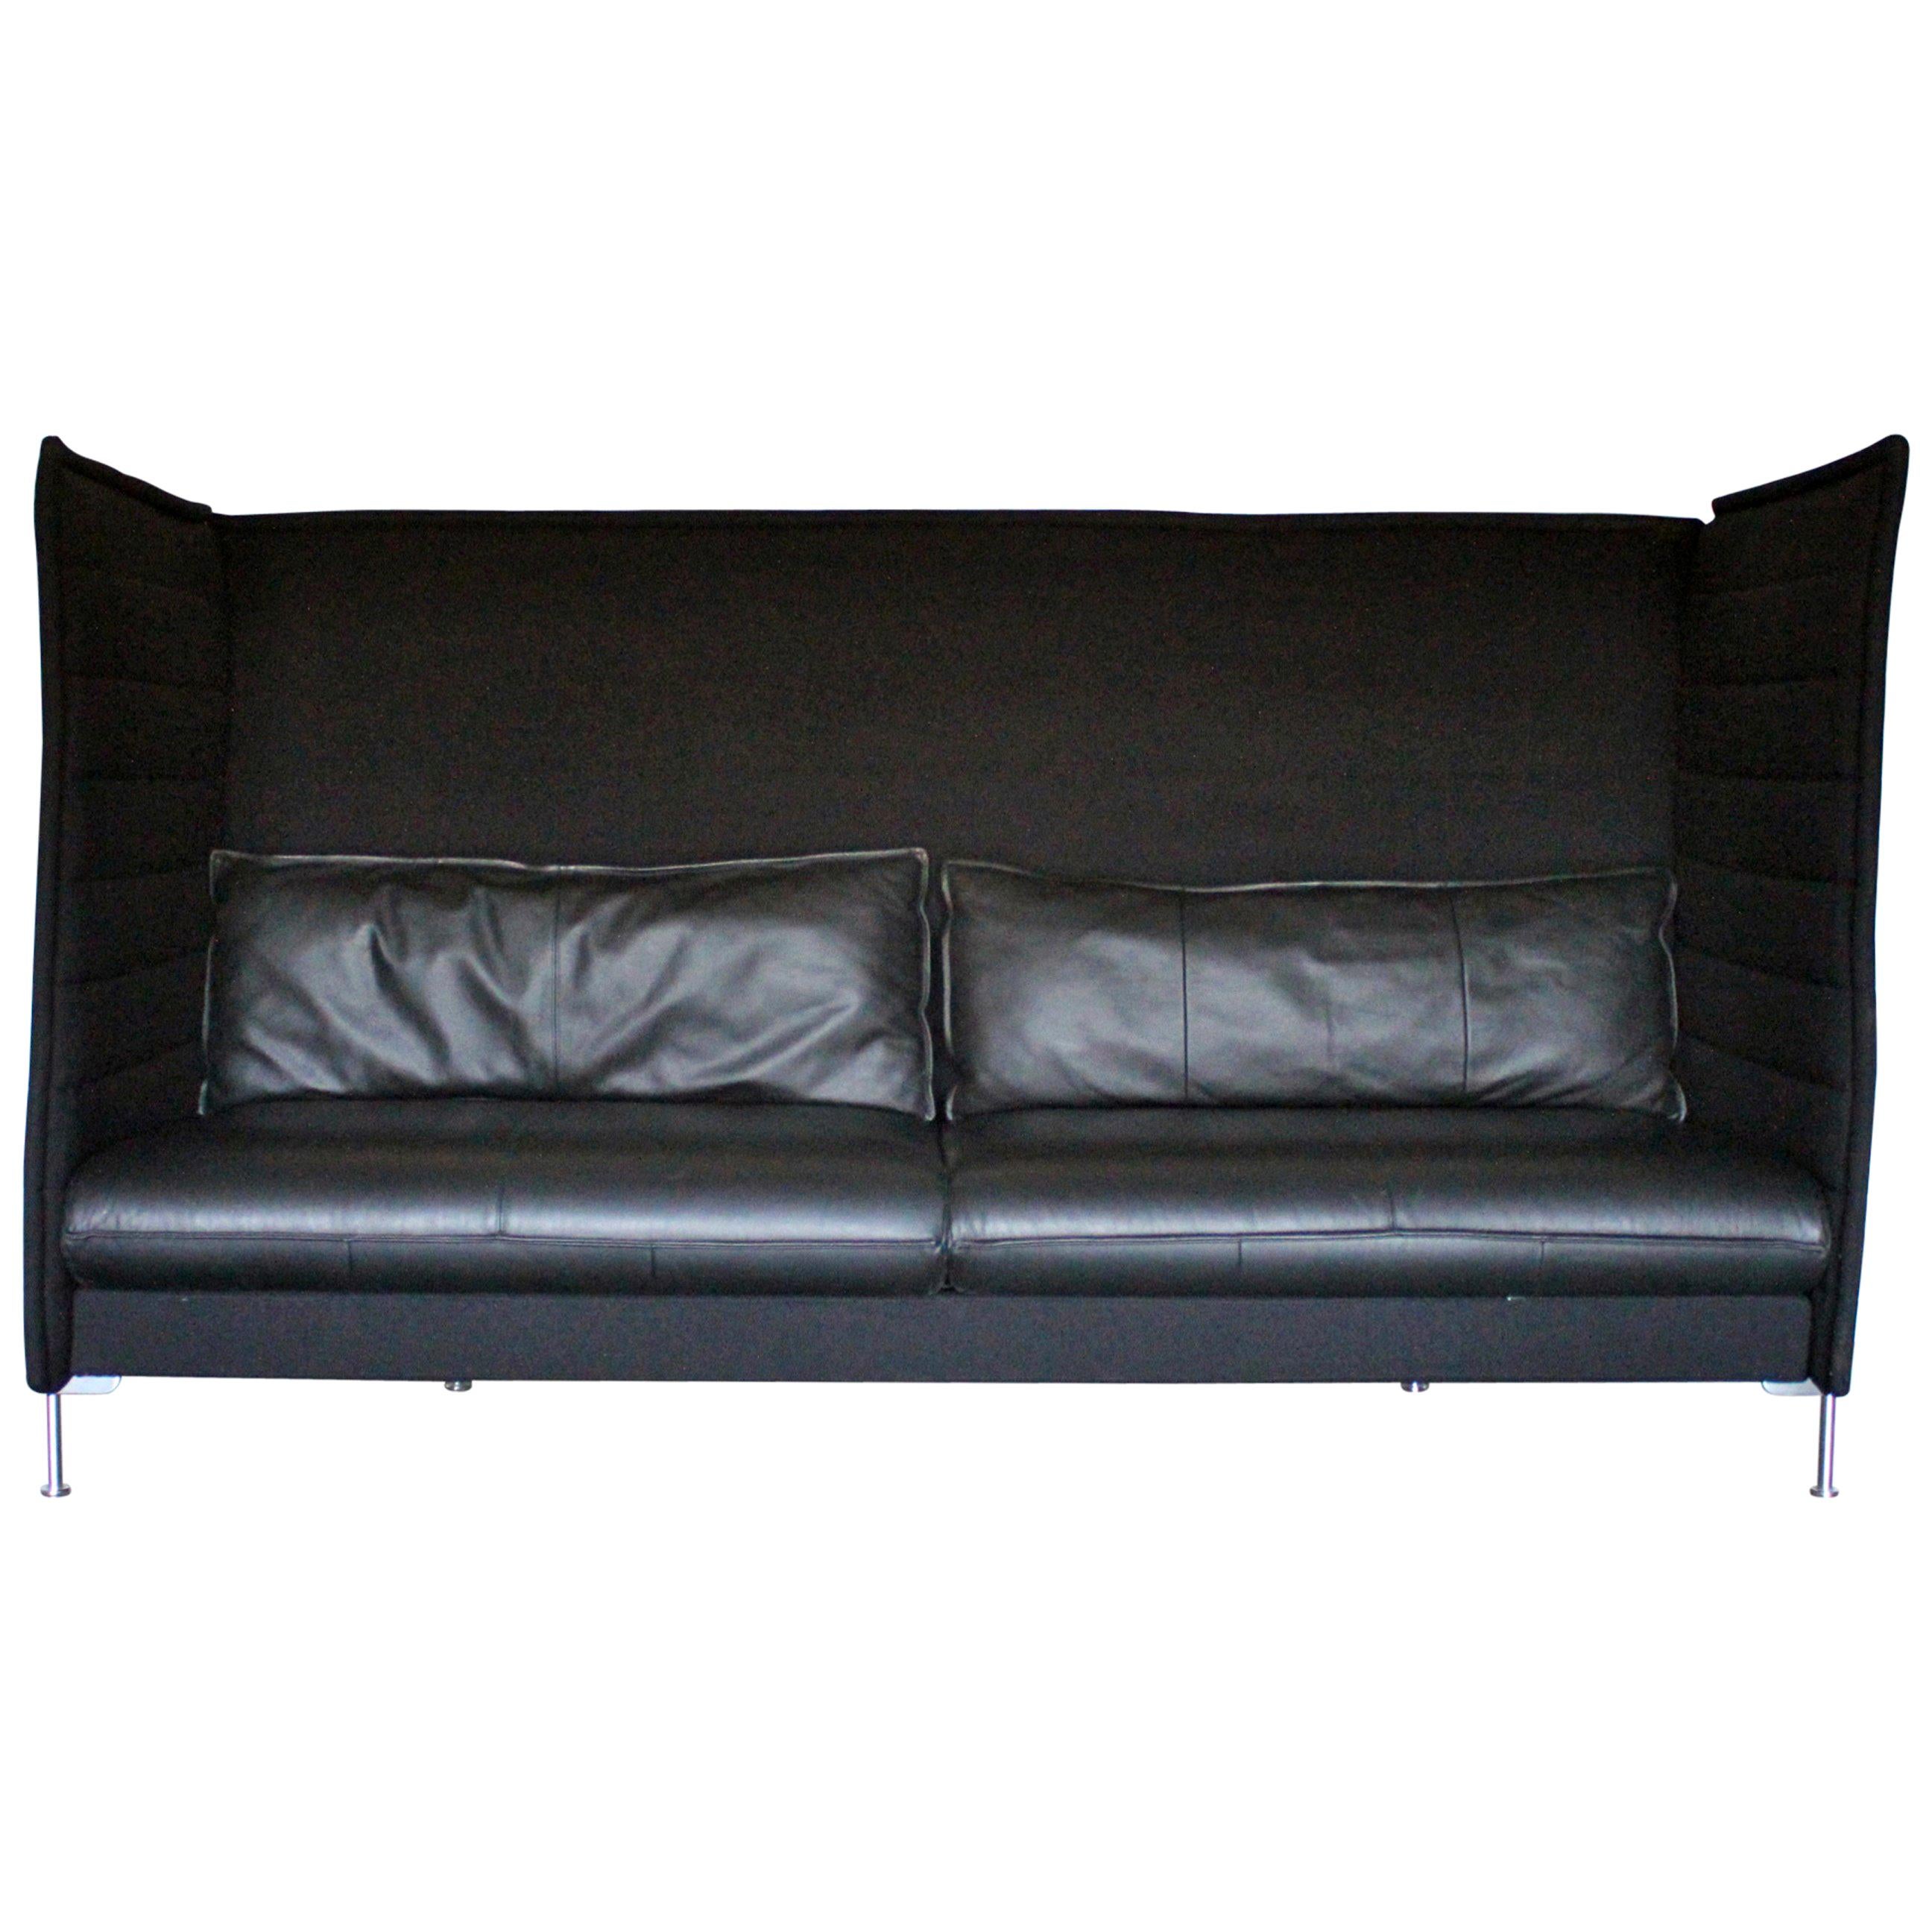 Vitra "Alcove" Three-Seat Sofa in Black "Credo" and Leather by R & E Bouroullec